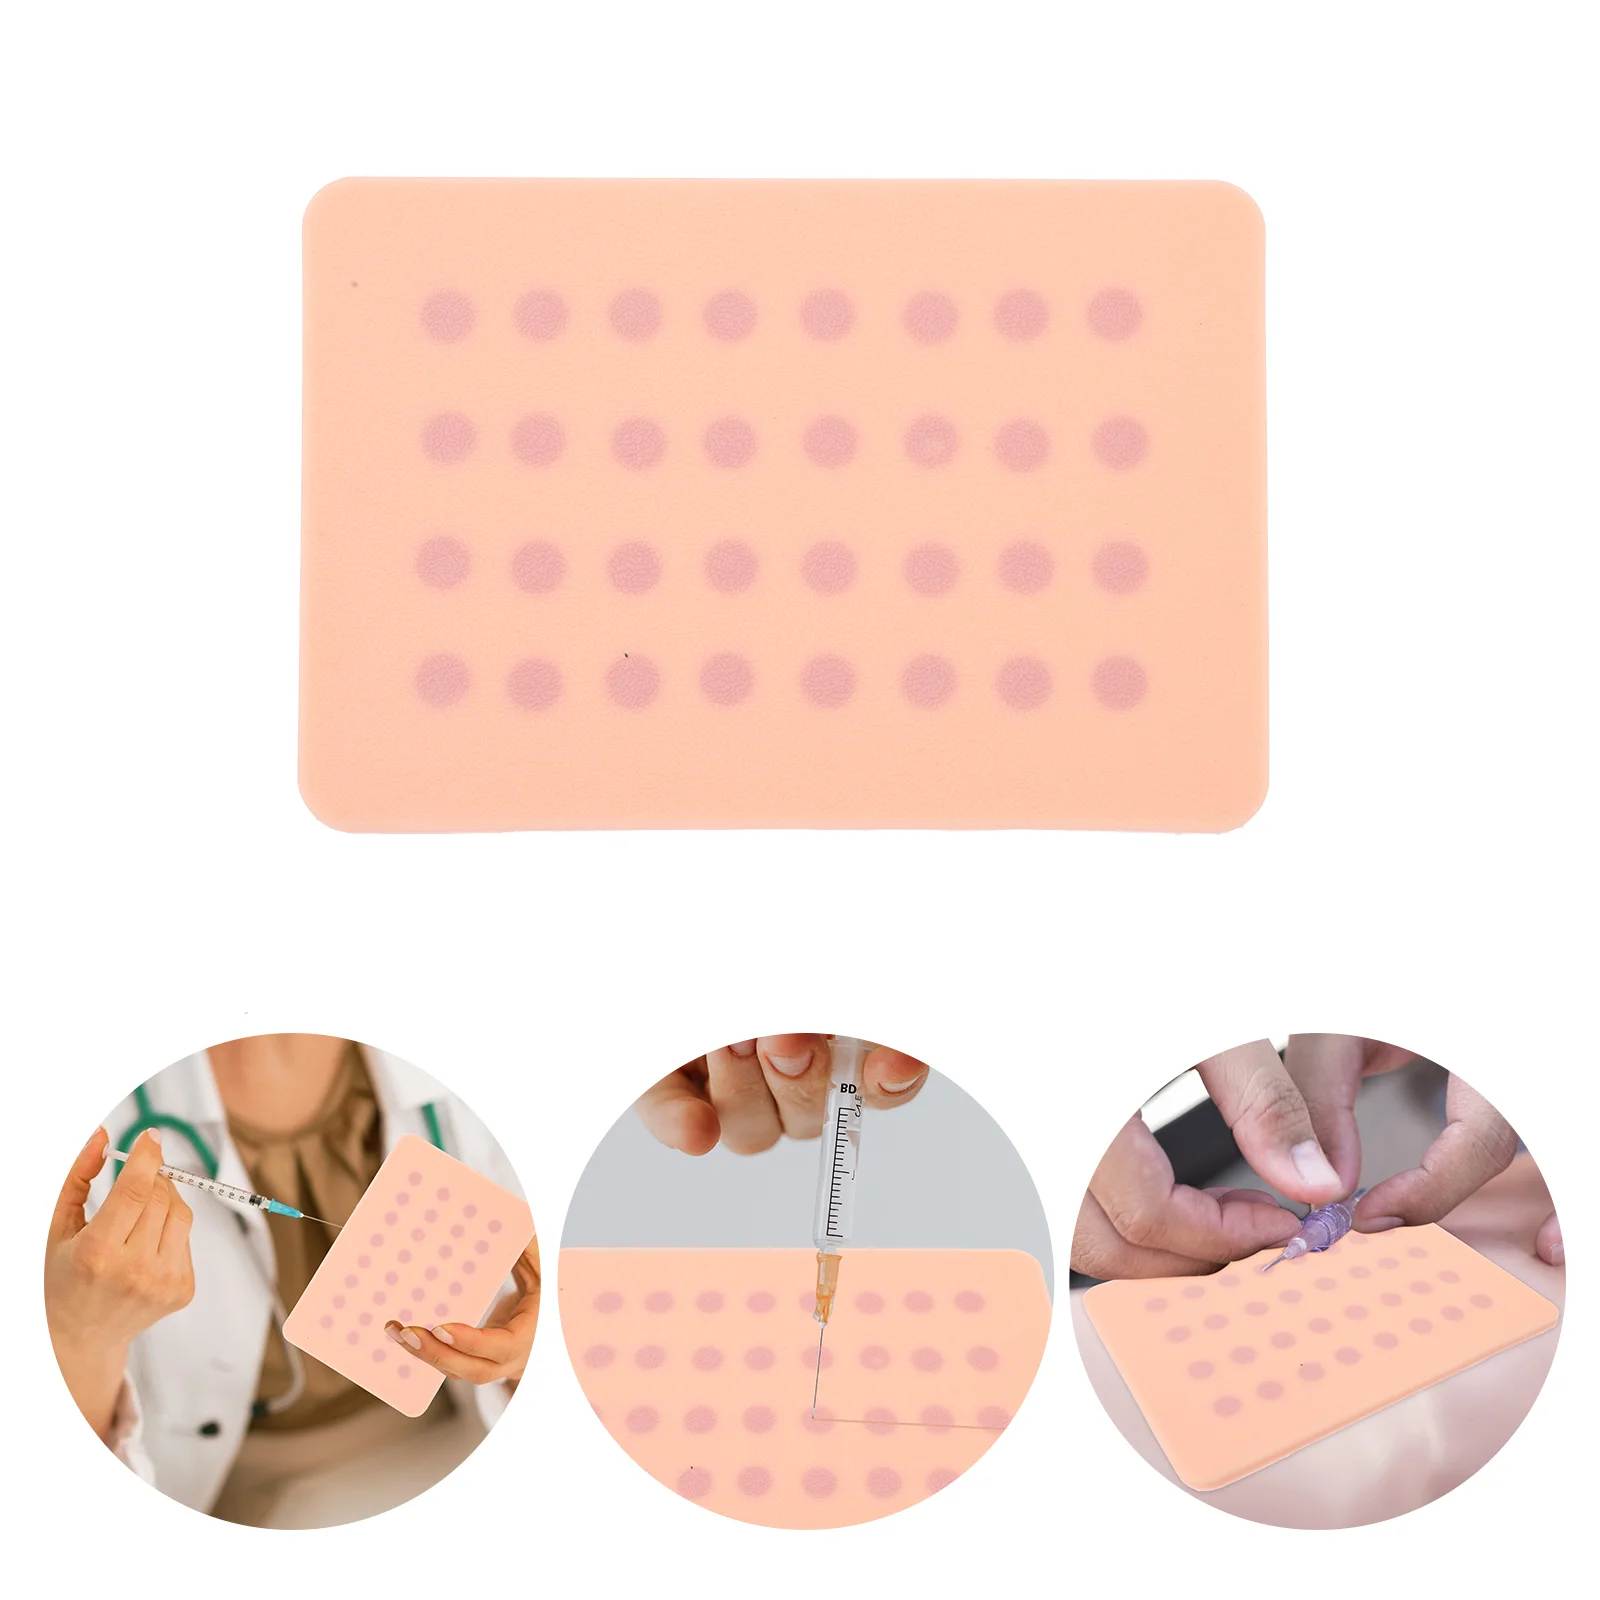 Subcutaneous Injection Practice Pad Injection Training Model for Nursing Students